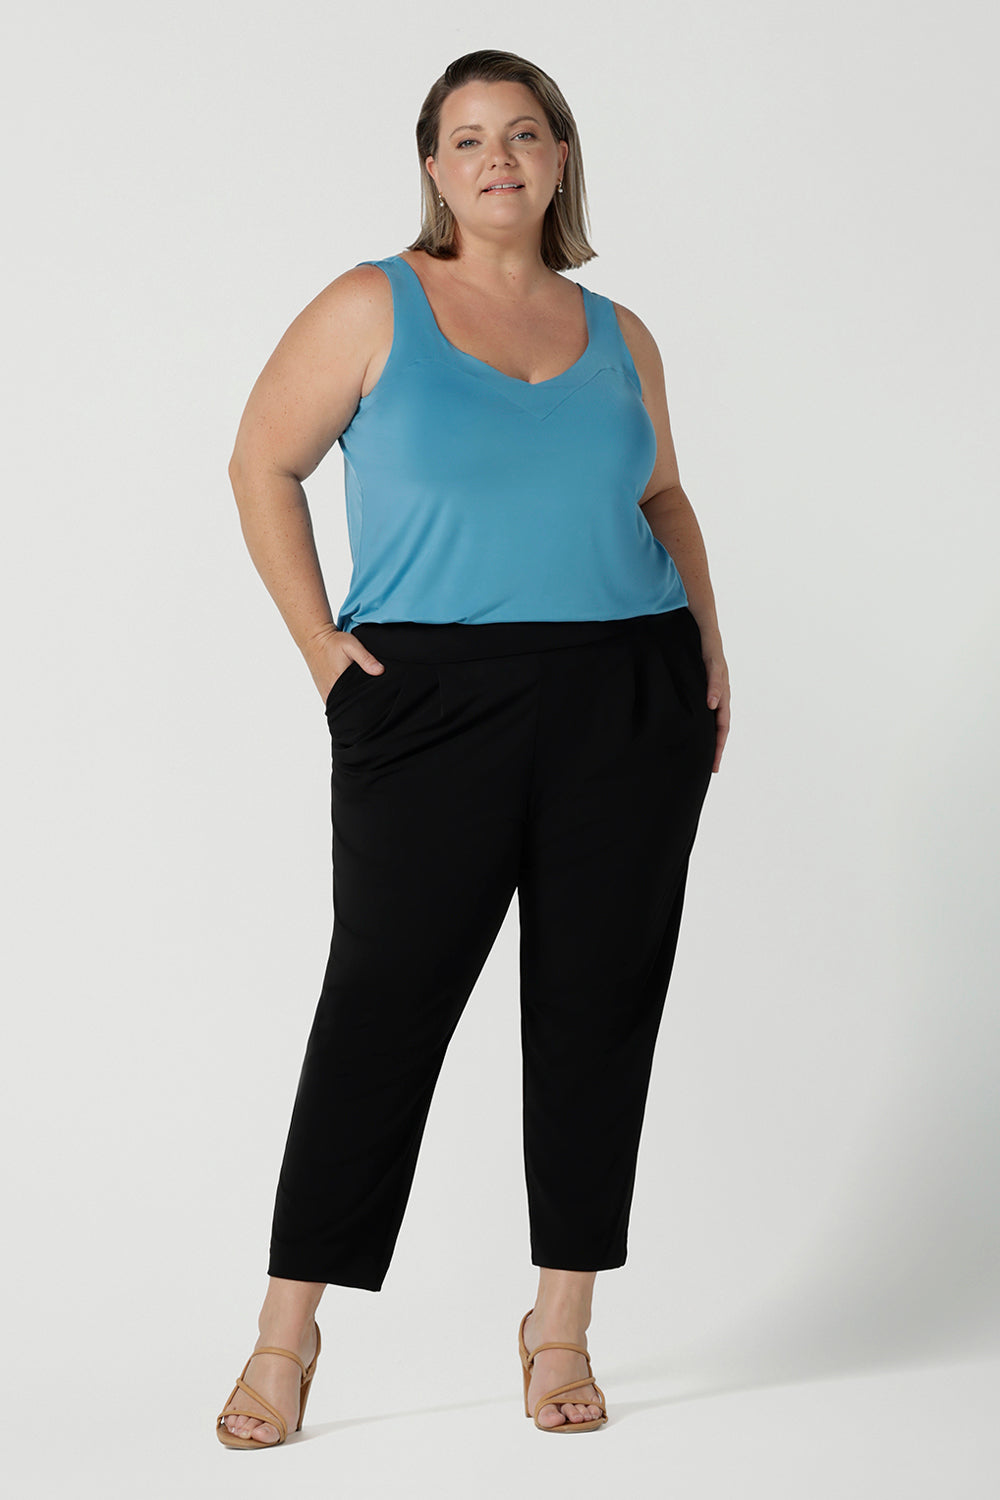 Curvy size 18 Woman wears the Tobie Pant in Black back with the Eddy Cami in Mineral. These pants are corporate casual pants great for work. Size inclusive corporate clothing for corporate women size 8 - 24.